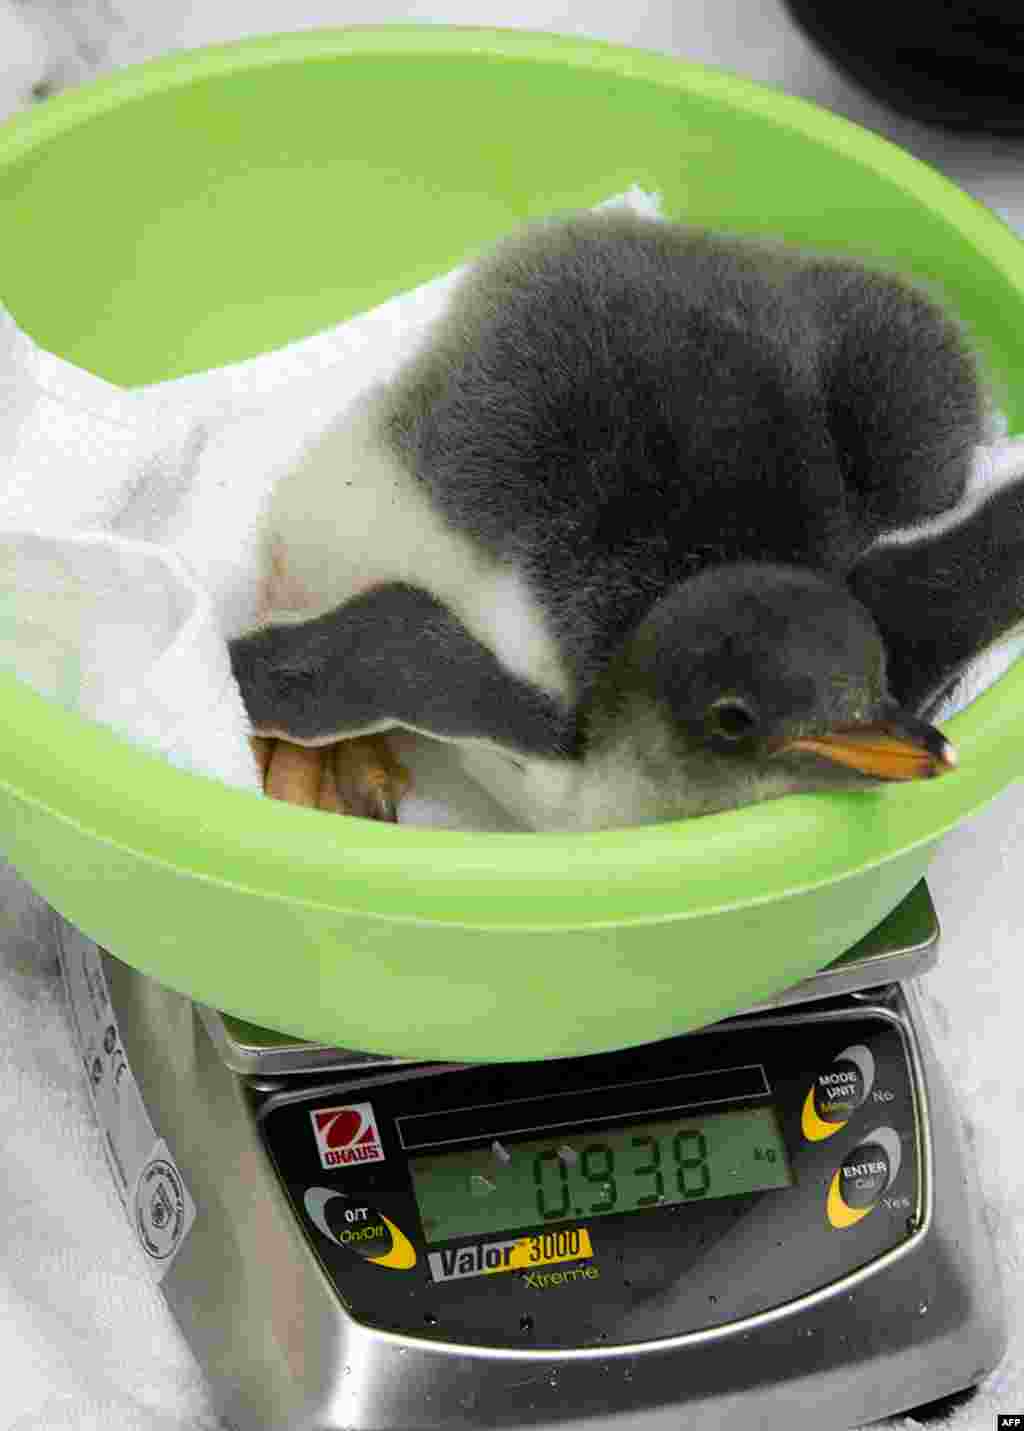 A sub-Antarctic Gentoo penguin chick sits on a weigh scale at SEA LIFE Melbourne Aquarium in Melbourne, Australia. With several Gentoo penguin pairs still sitting on eggs, keepers are hopeful of the arrival of several more chicks before Christmas.